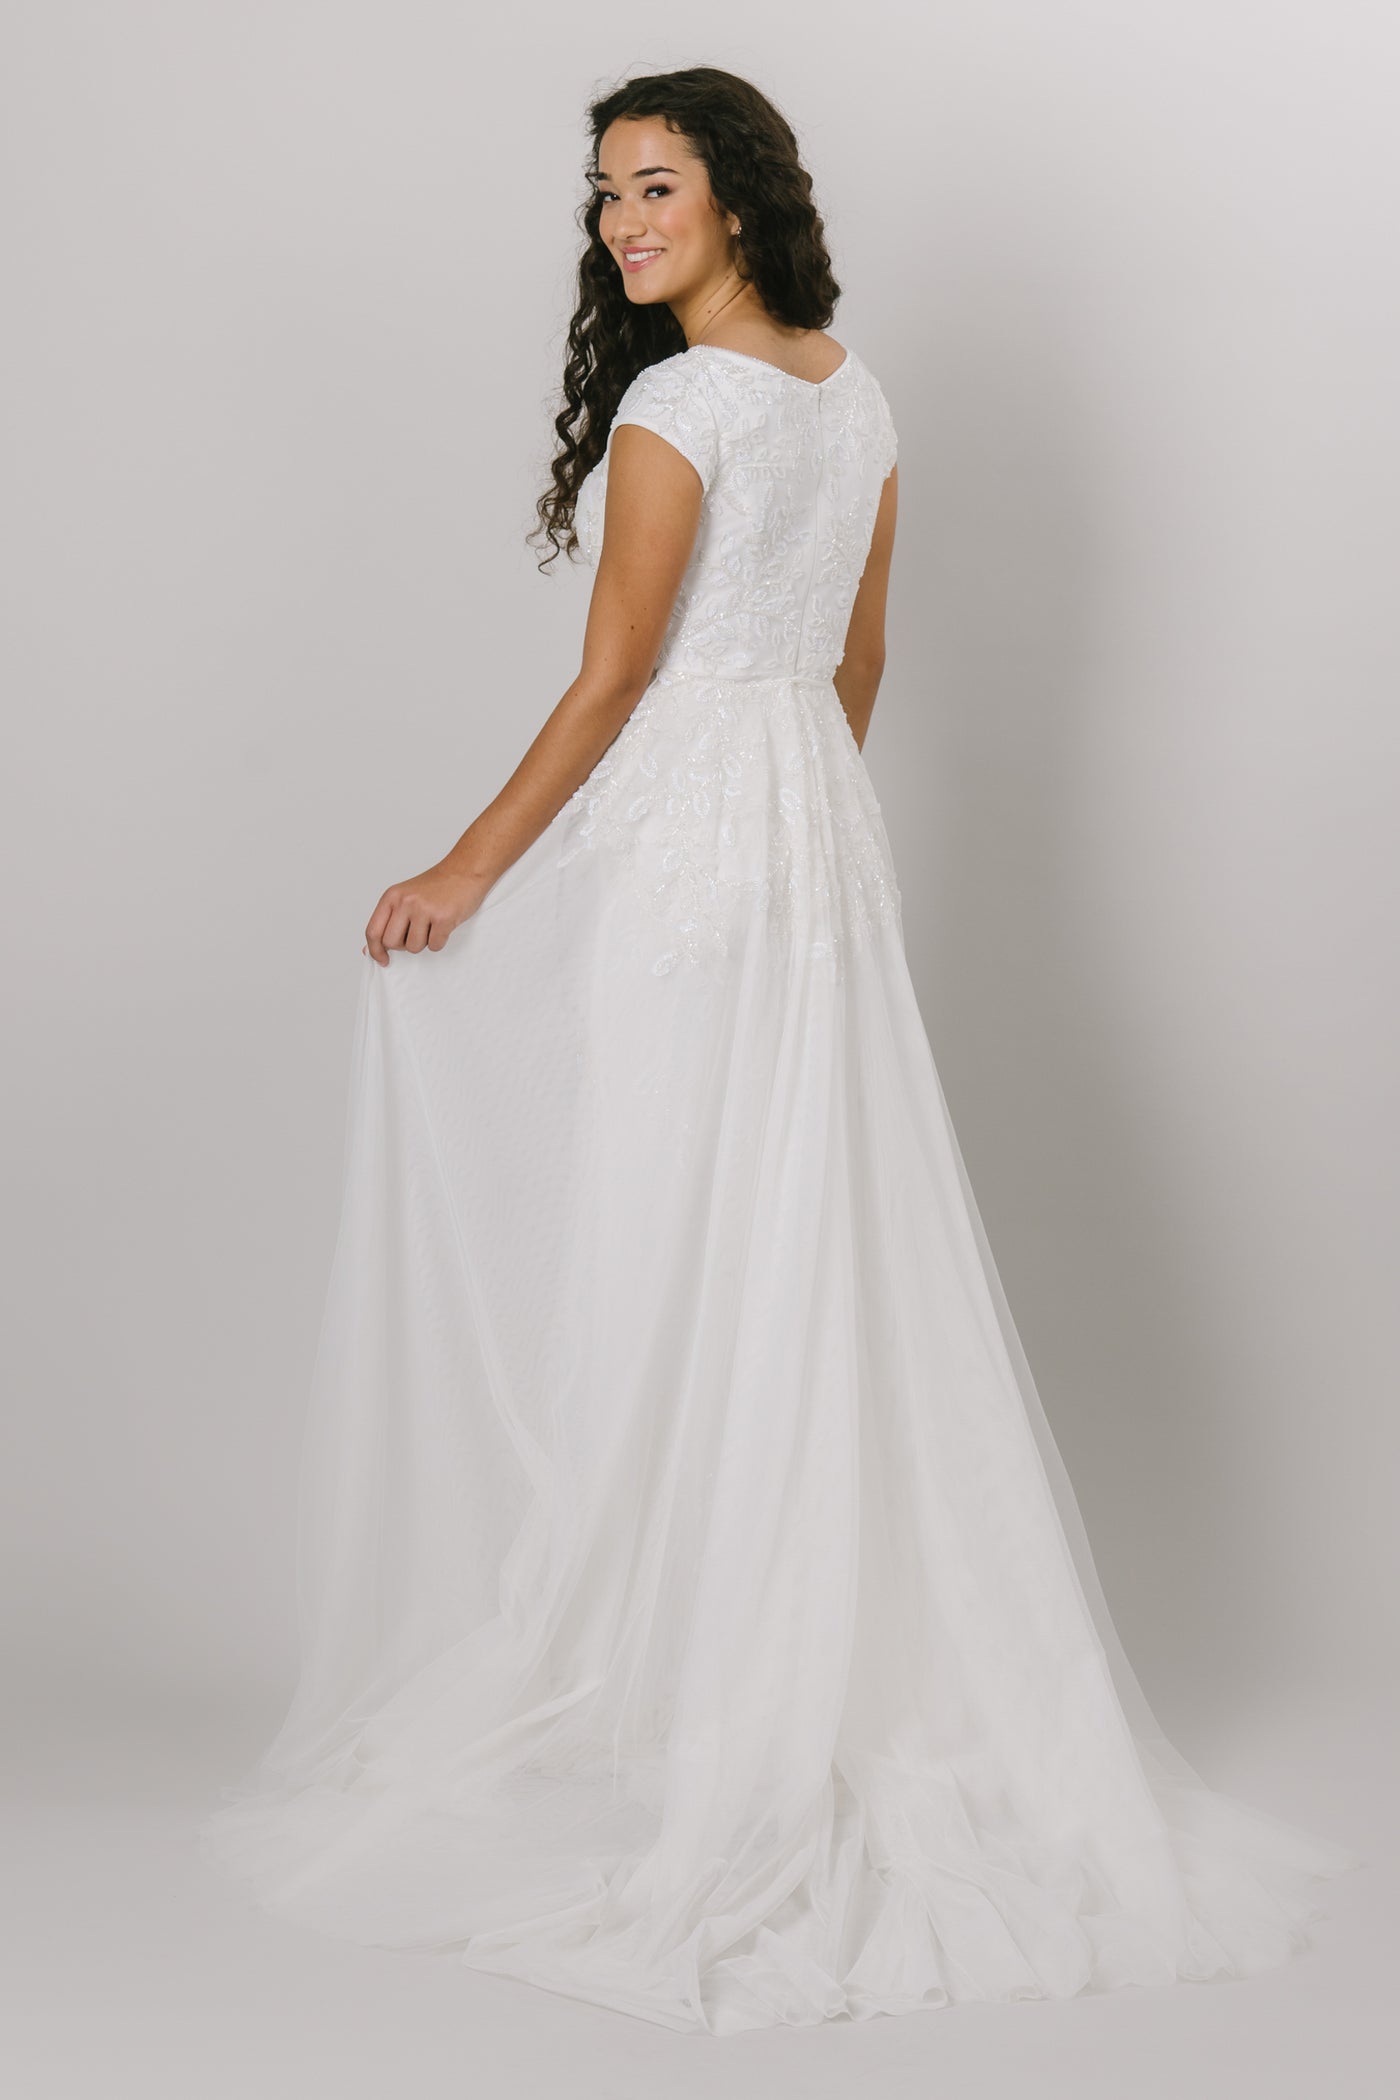 A backshot of the Kalani, which is a fitted, modest wedding dress features a beaded lace applique, cap sleeves, a flowy skirt, and a soft scoop neckline.